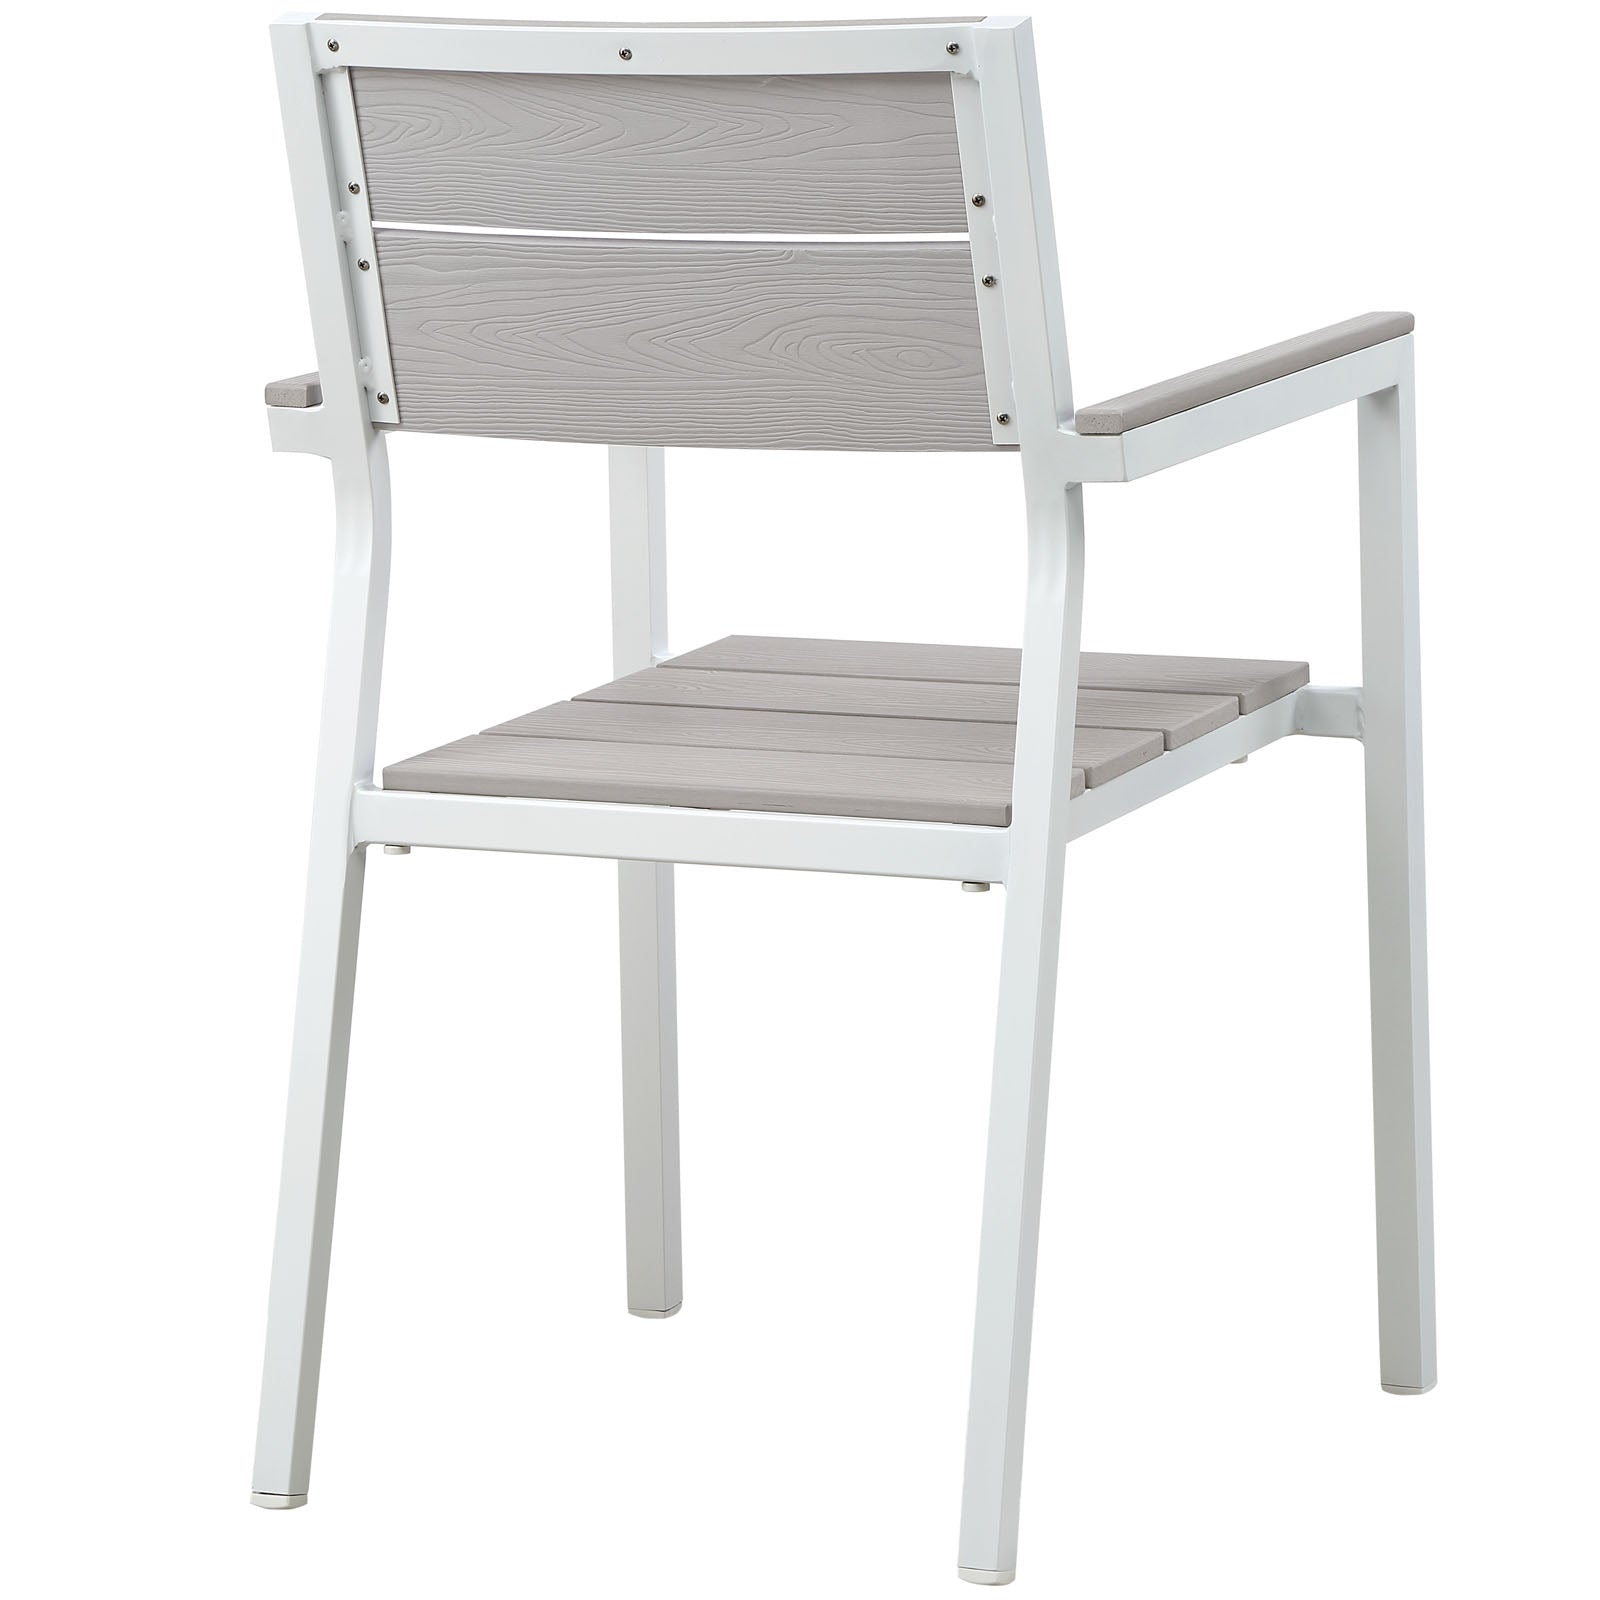 Modway Outdoor Dining Sets - Maine Outdoor Dining Set for 8 White & Light Gray